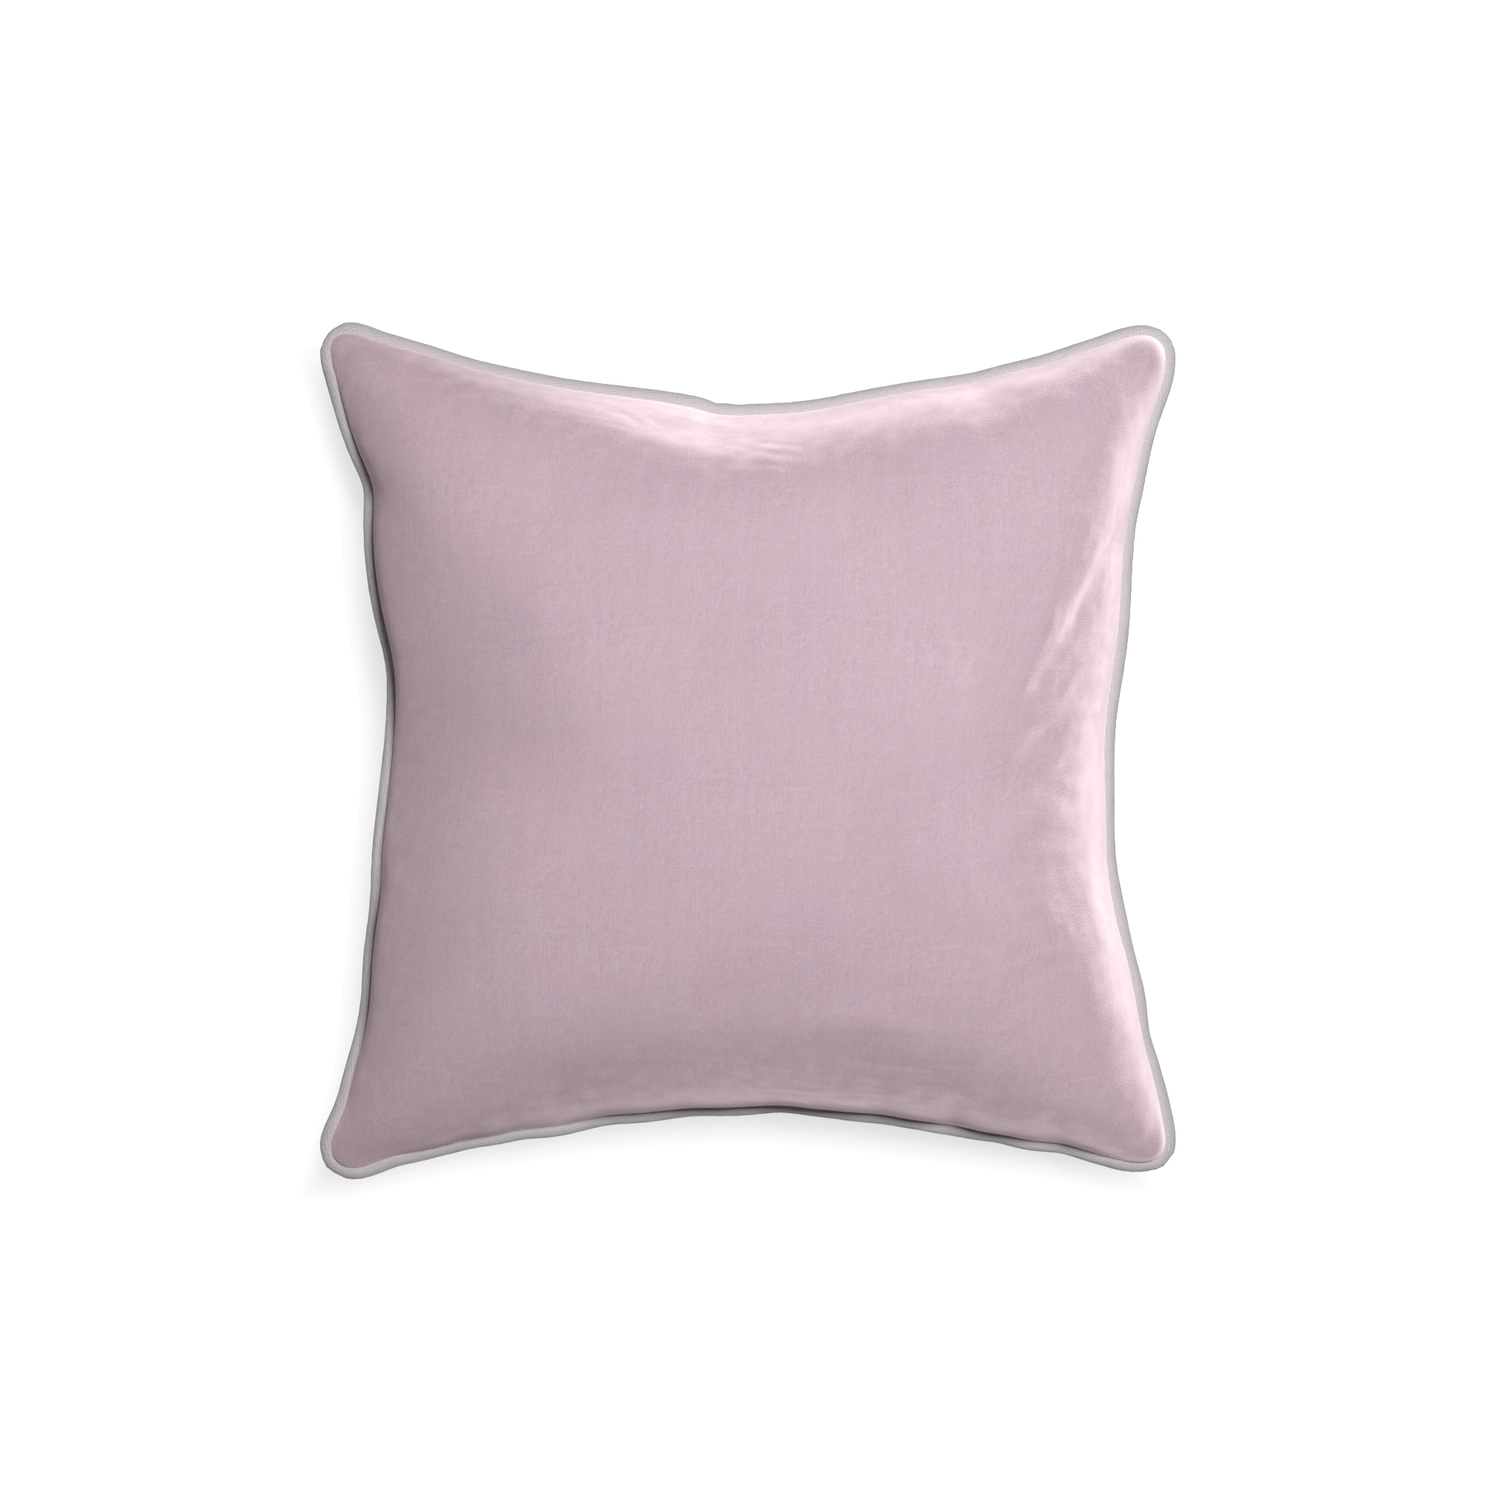 18-square lilac velvet custom lilacpillow with pebble piping on white background